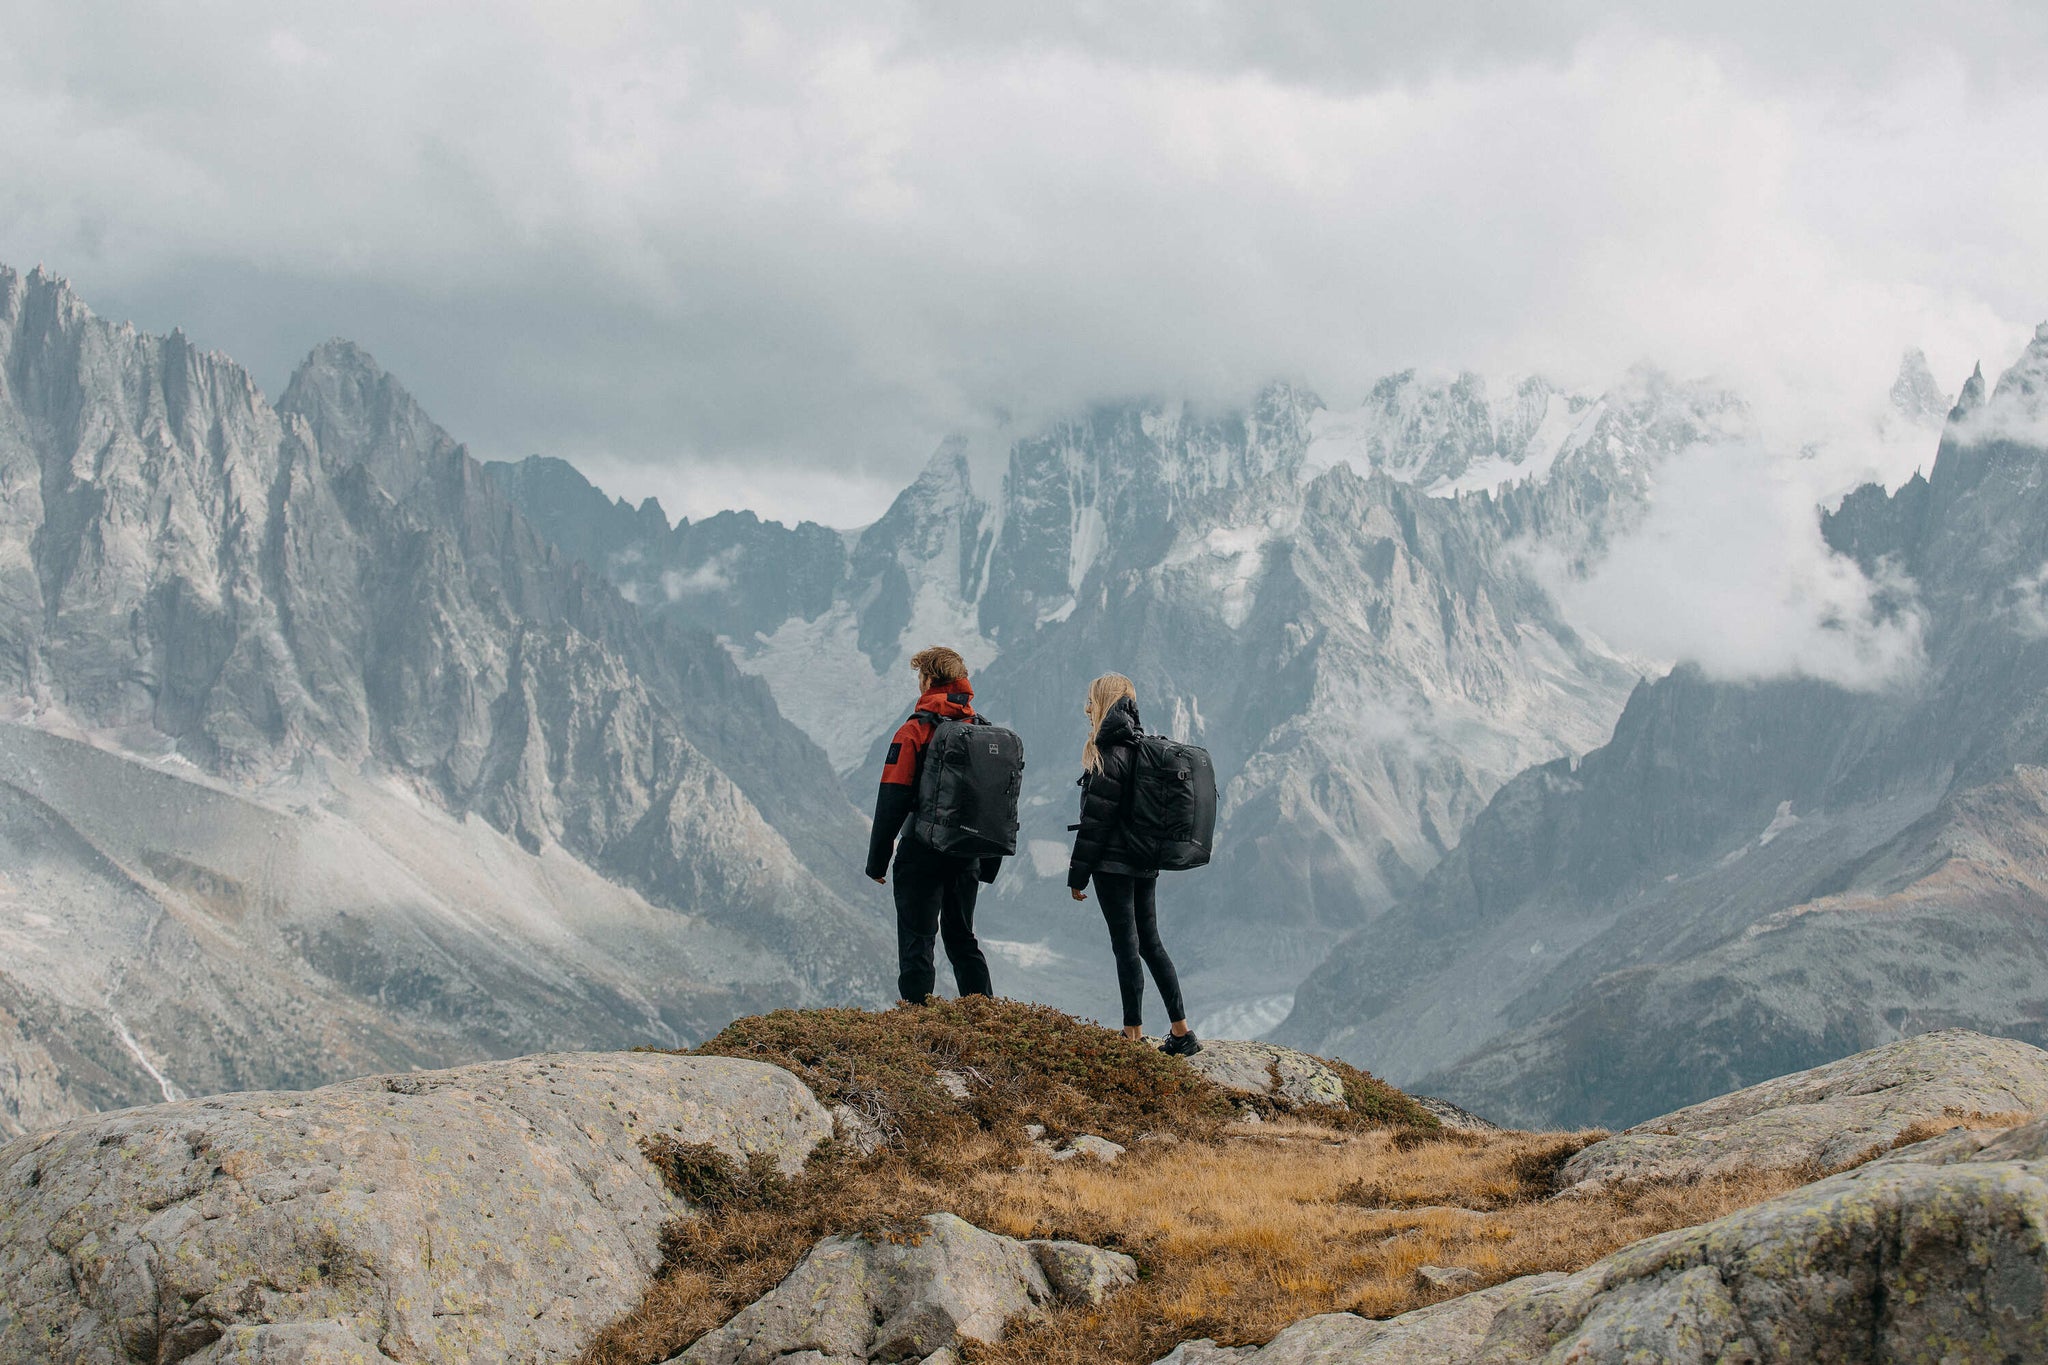 Two people with the Adventure bag in Chamonix mountains